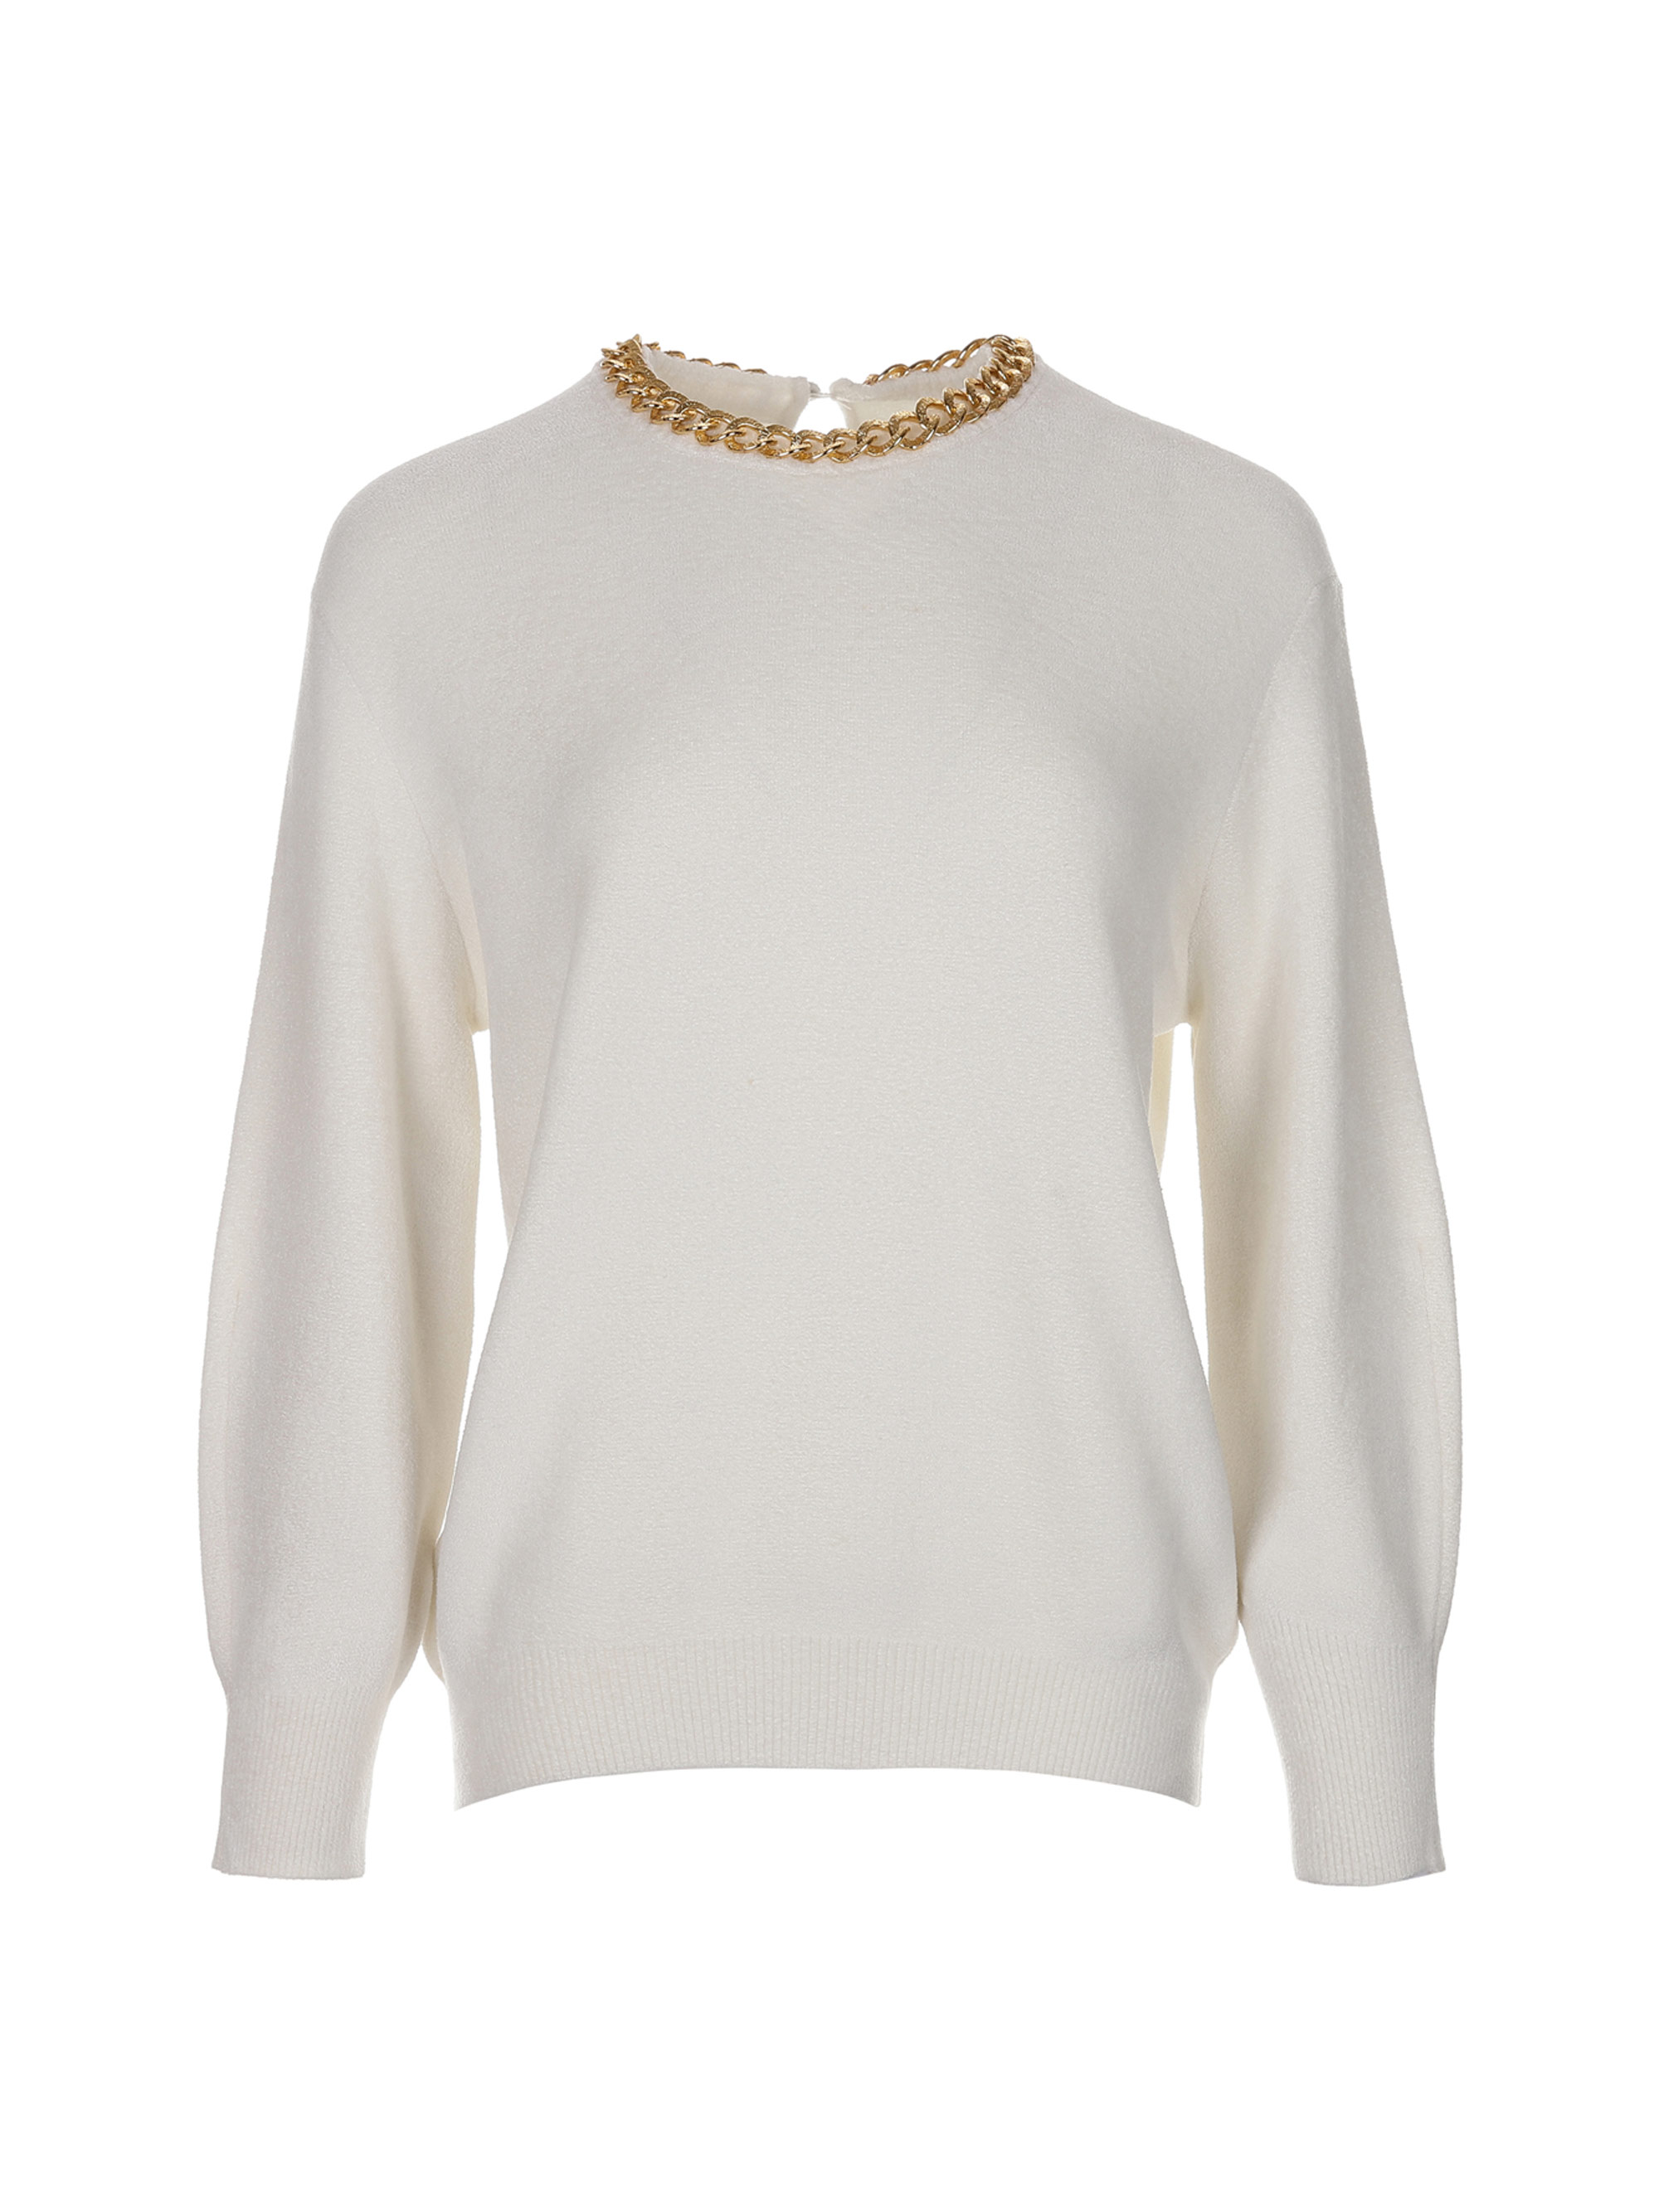 Fluffy Chain Detail Pullover - Ivory